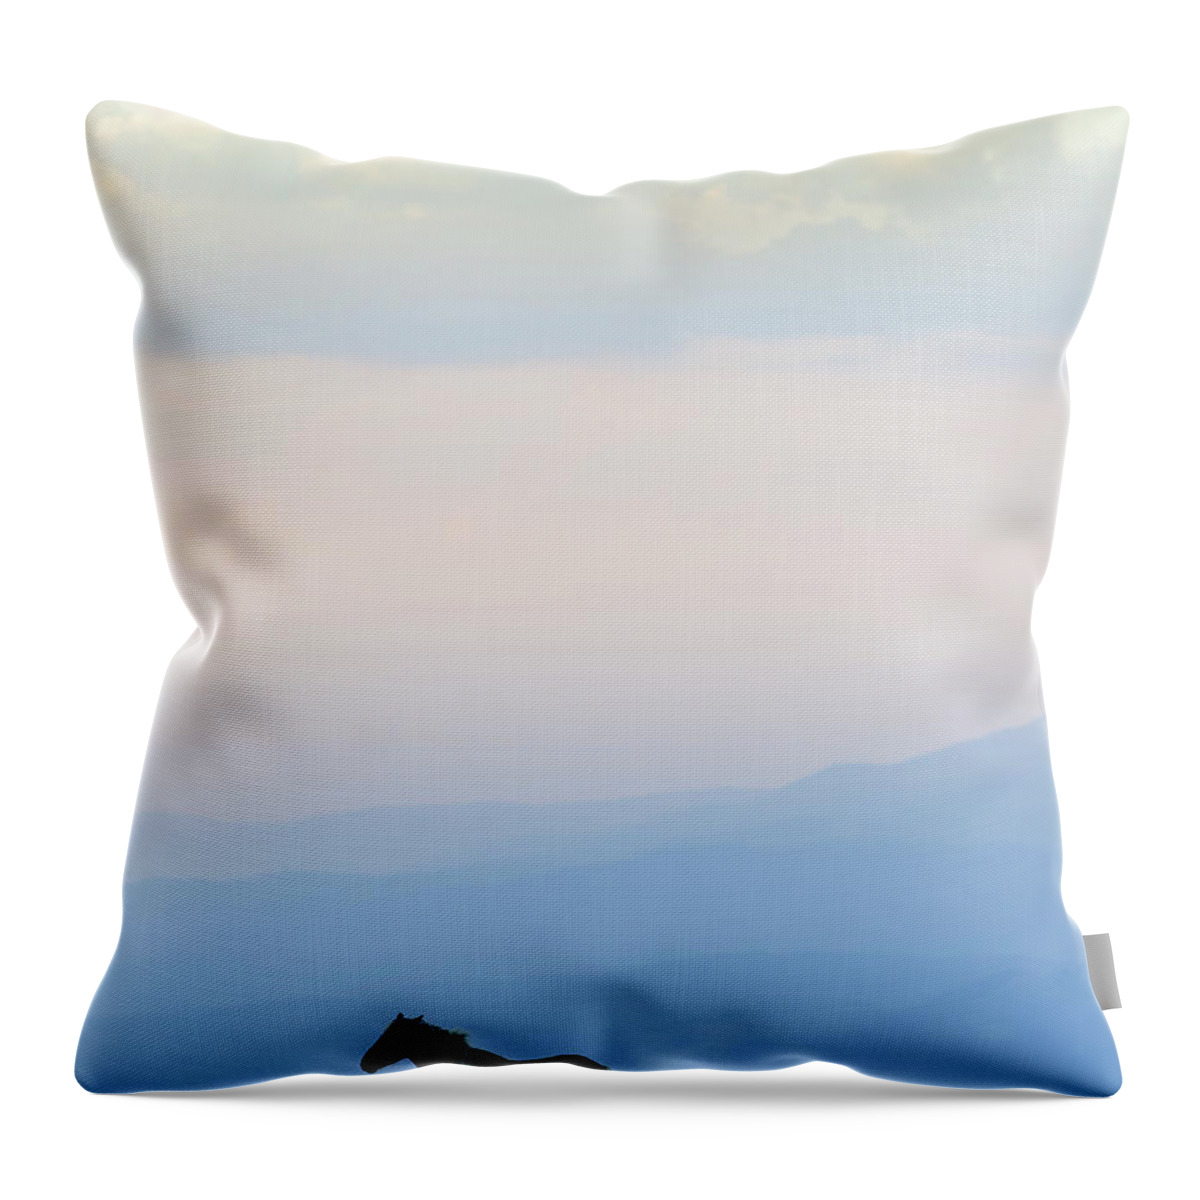 Horse Throw Pillow featuring the photograph Horse - Rila Mountains by Steve Somerville